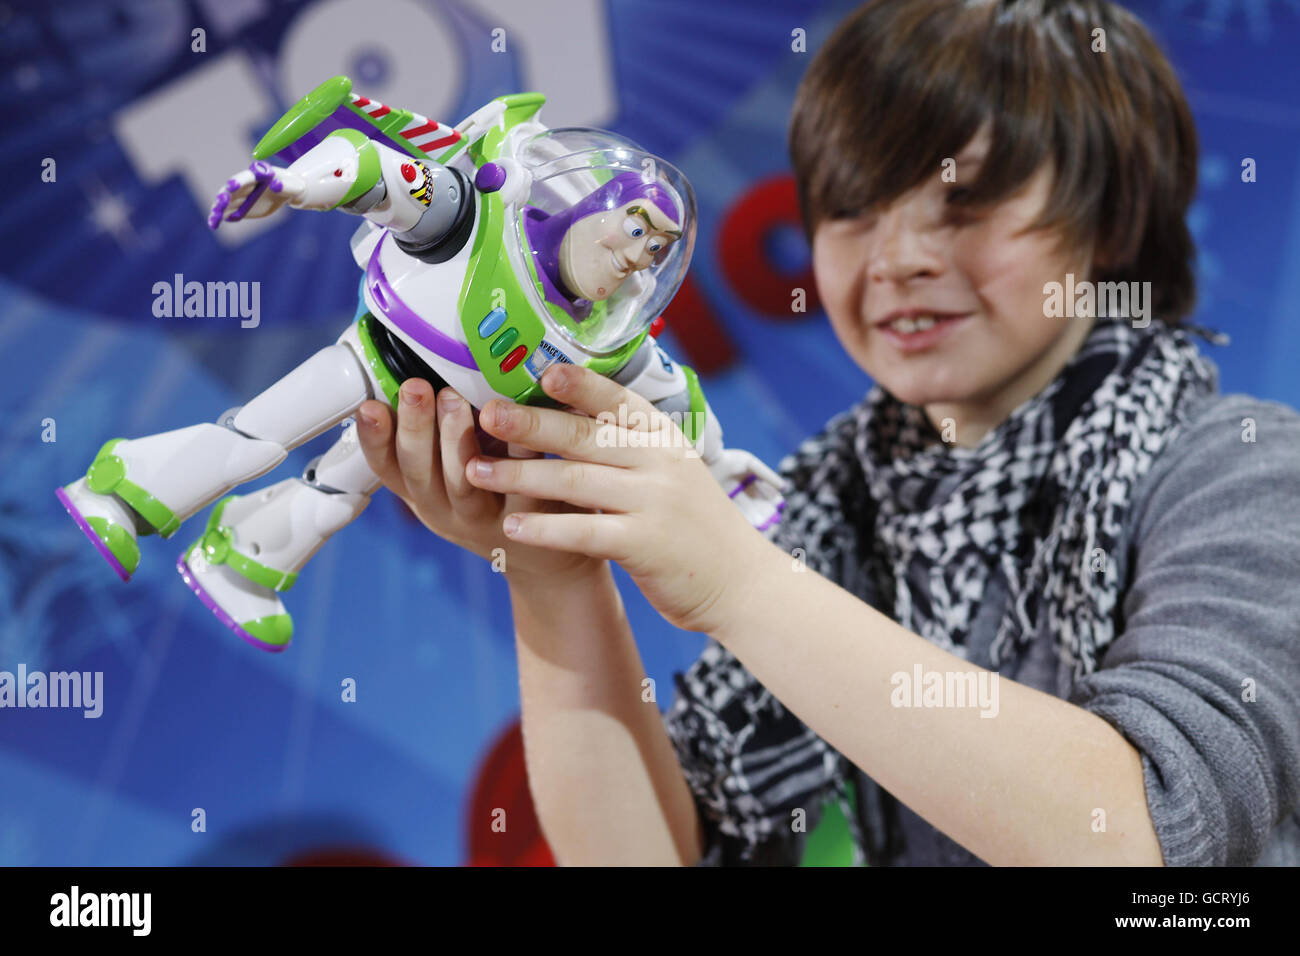 Kailum Alden, aged 9 with Jet Pack Buzz Lightyear, Mattel UK (39.99) which has been predicted to be one of the top twelve toys this Christmas at the Toy Retailers Association's (TRA) Dream Toys 2010 media preview, St Mary's Church, Marylebone, London. Stock Photo